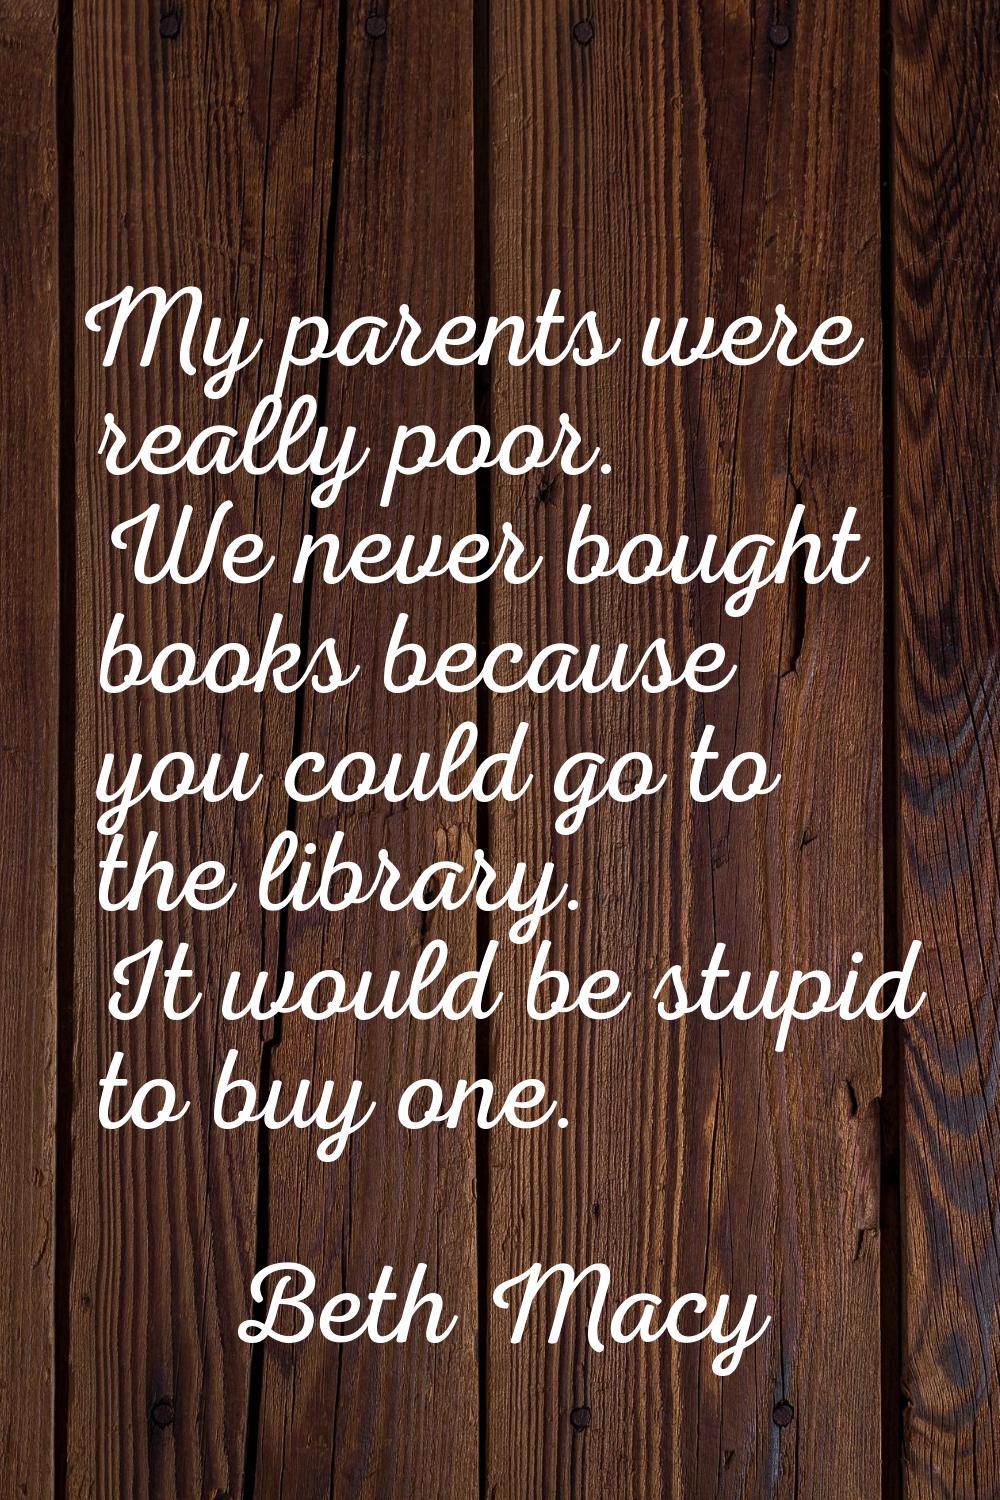 My parents were really poor. We never bought books because you could go to the library. It would be